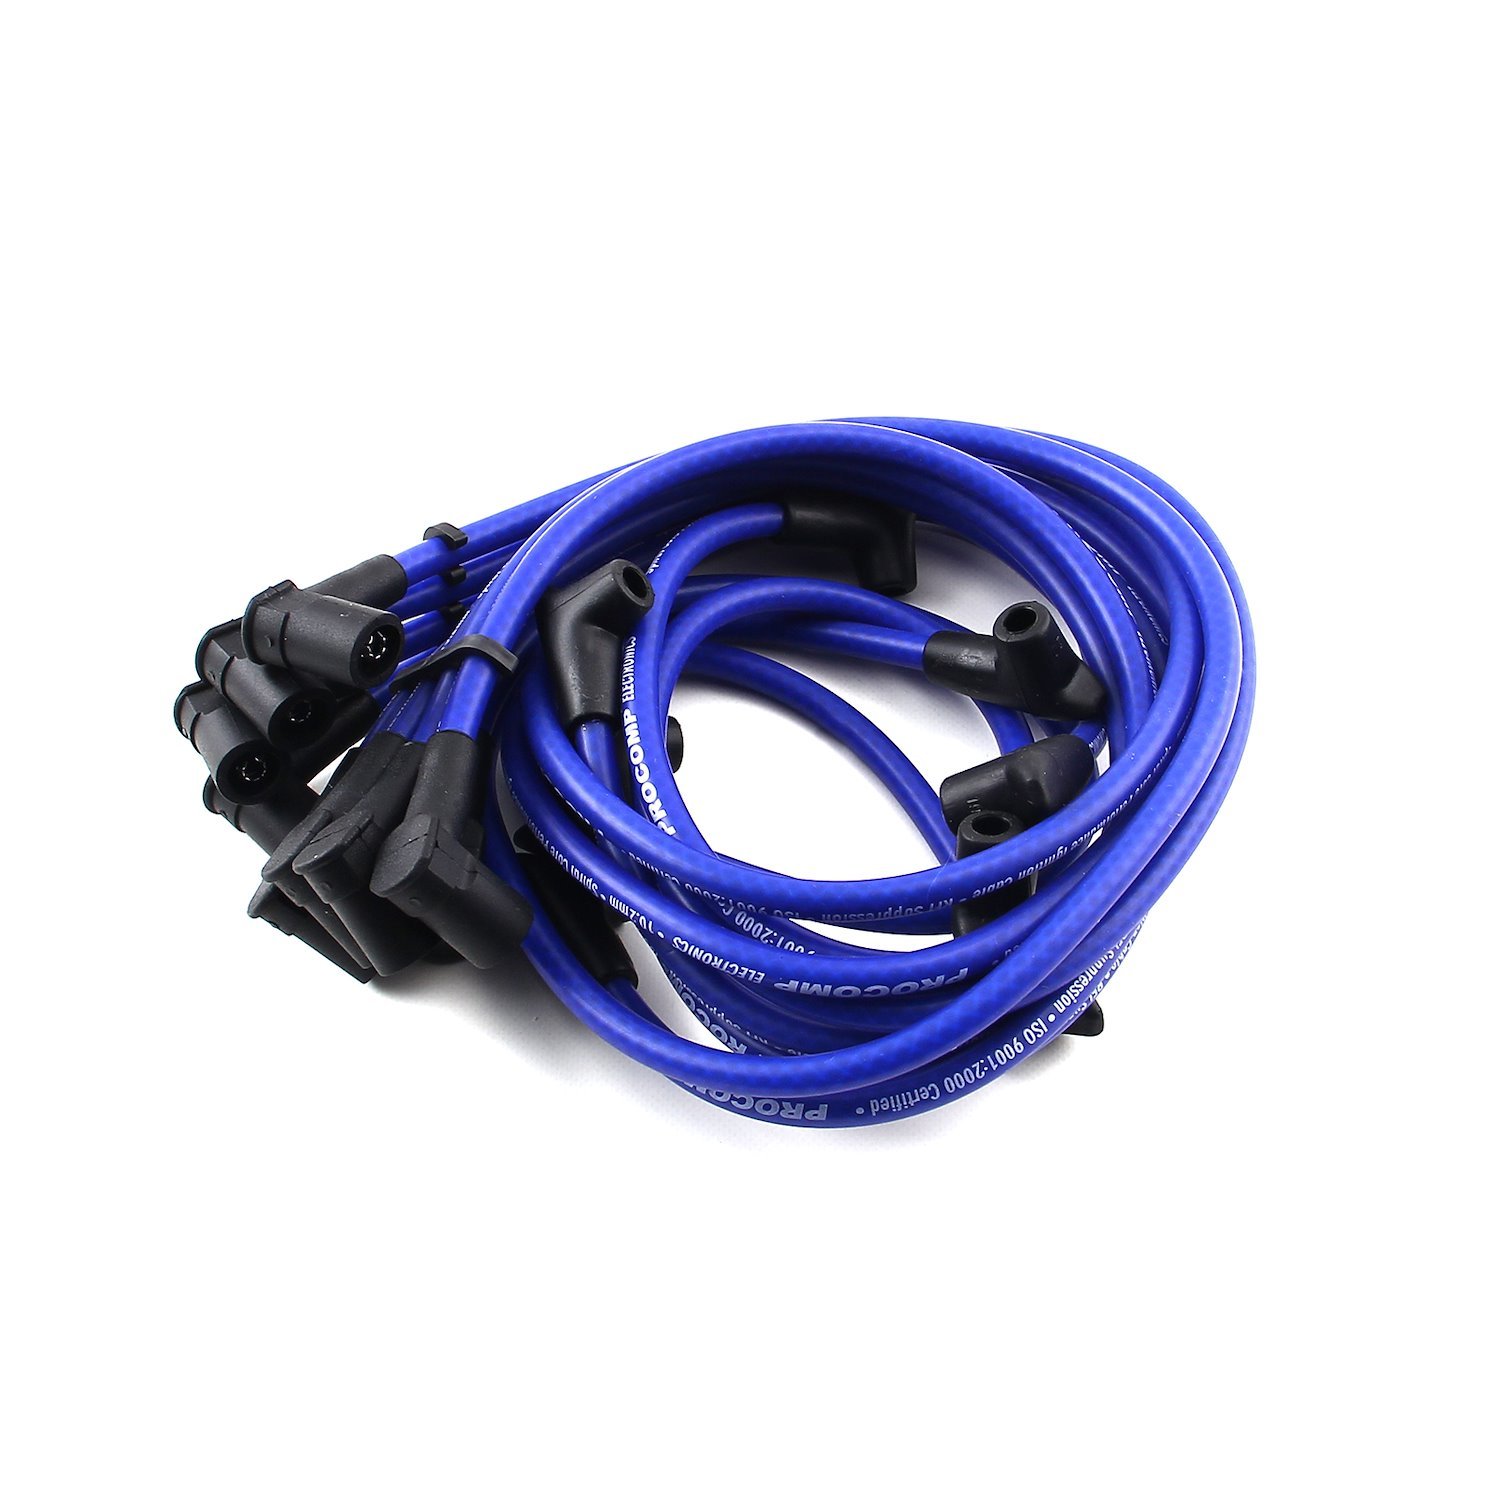 Universal 90 Deg to 90 Deg Over Covers Female Blue Spark Plug Wires Suits Chevy